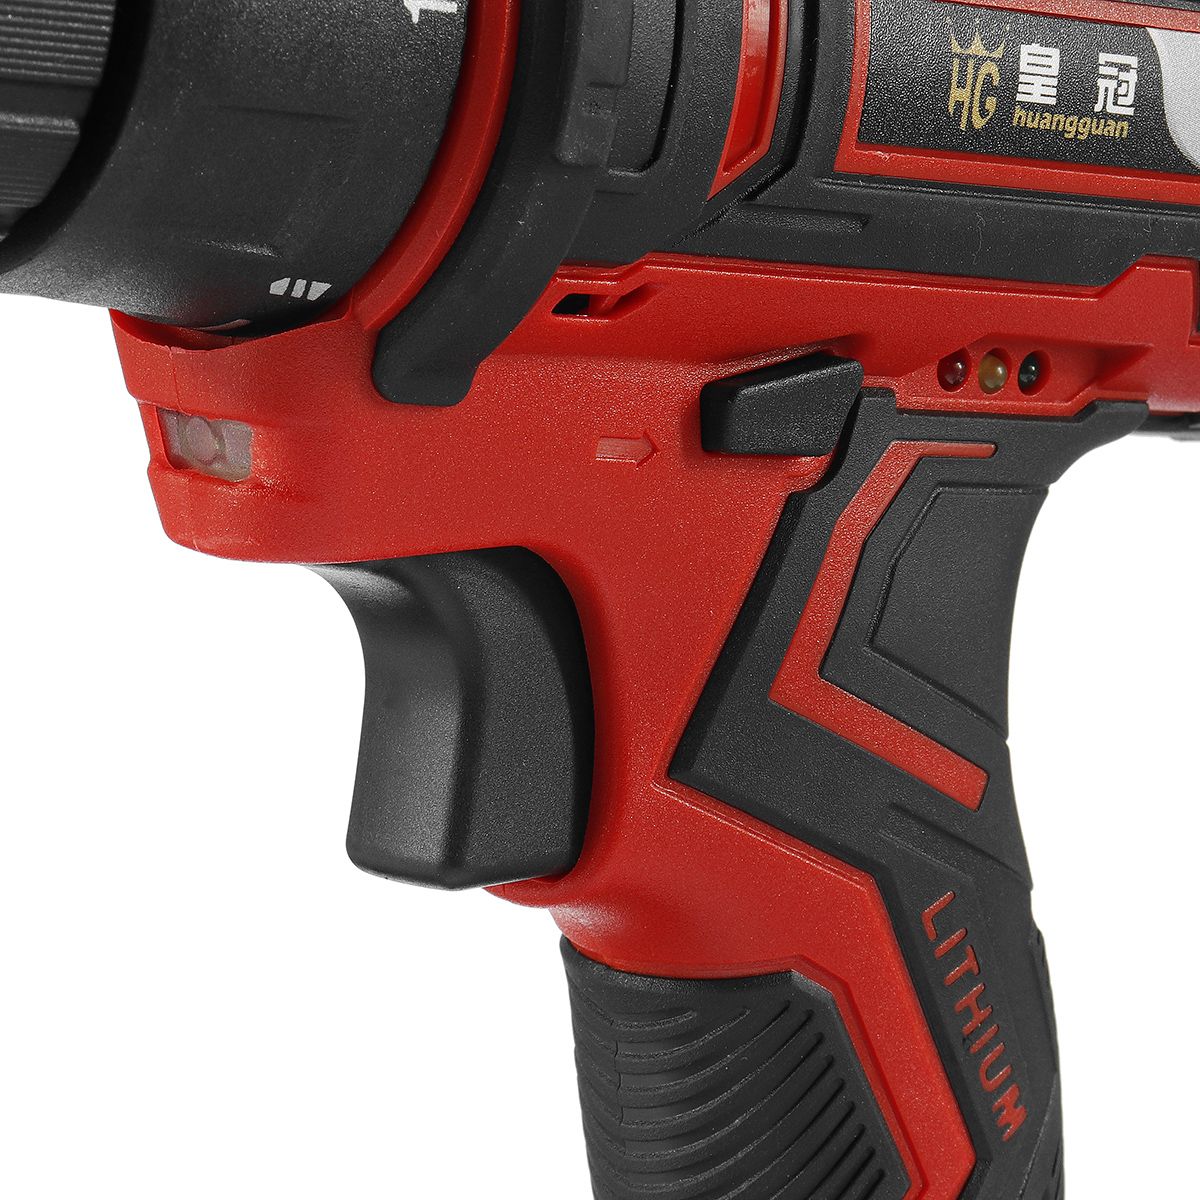 251-Lithium-Electric-Drill-10mm-Power-Drilling-Tool-Cordless-Drill-With-1-Or-2-Li-ion-Batteries-1531612